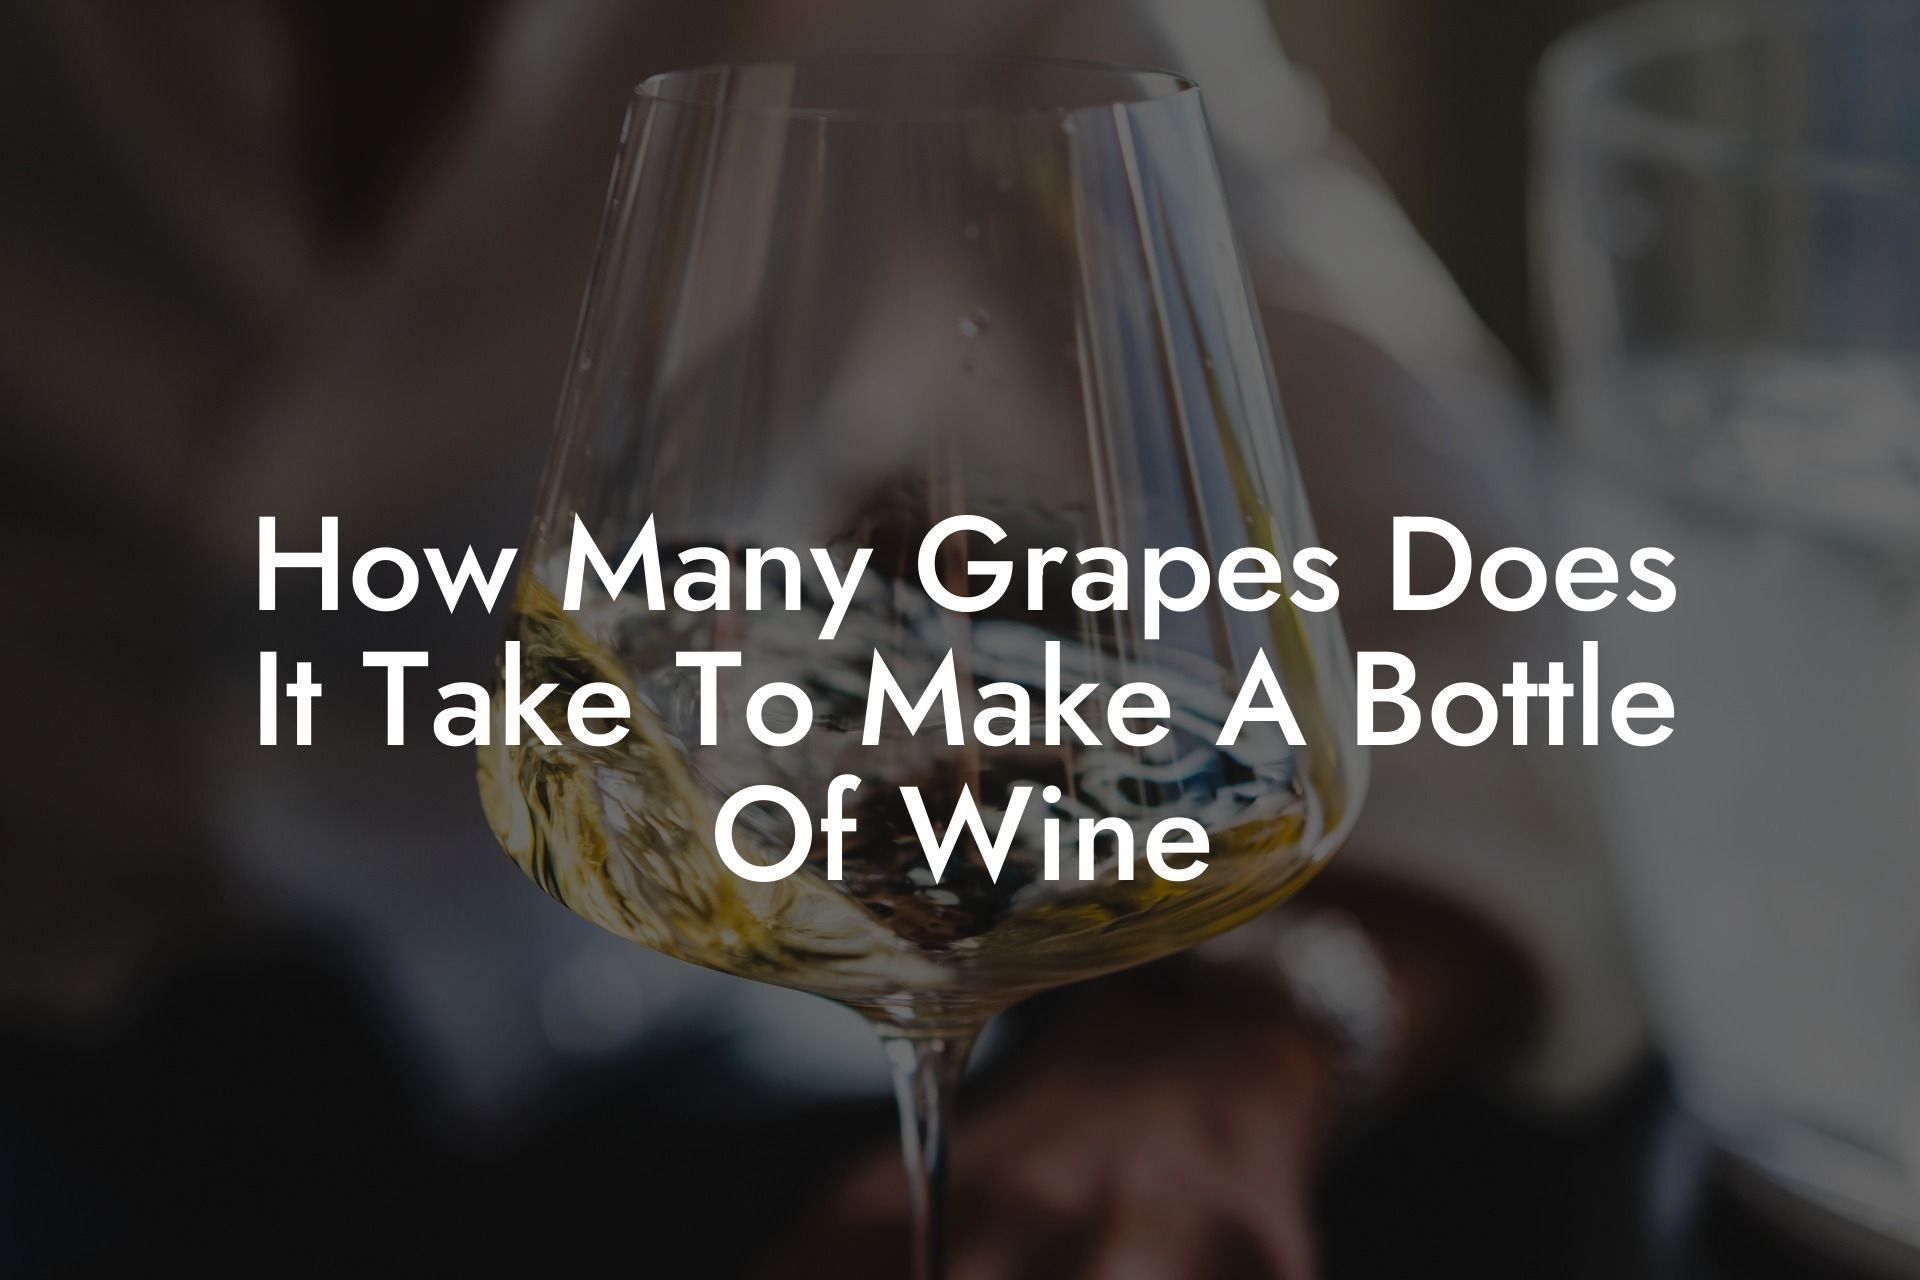 How Many Grapes Does It Take To Make A Bottle Of Wine